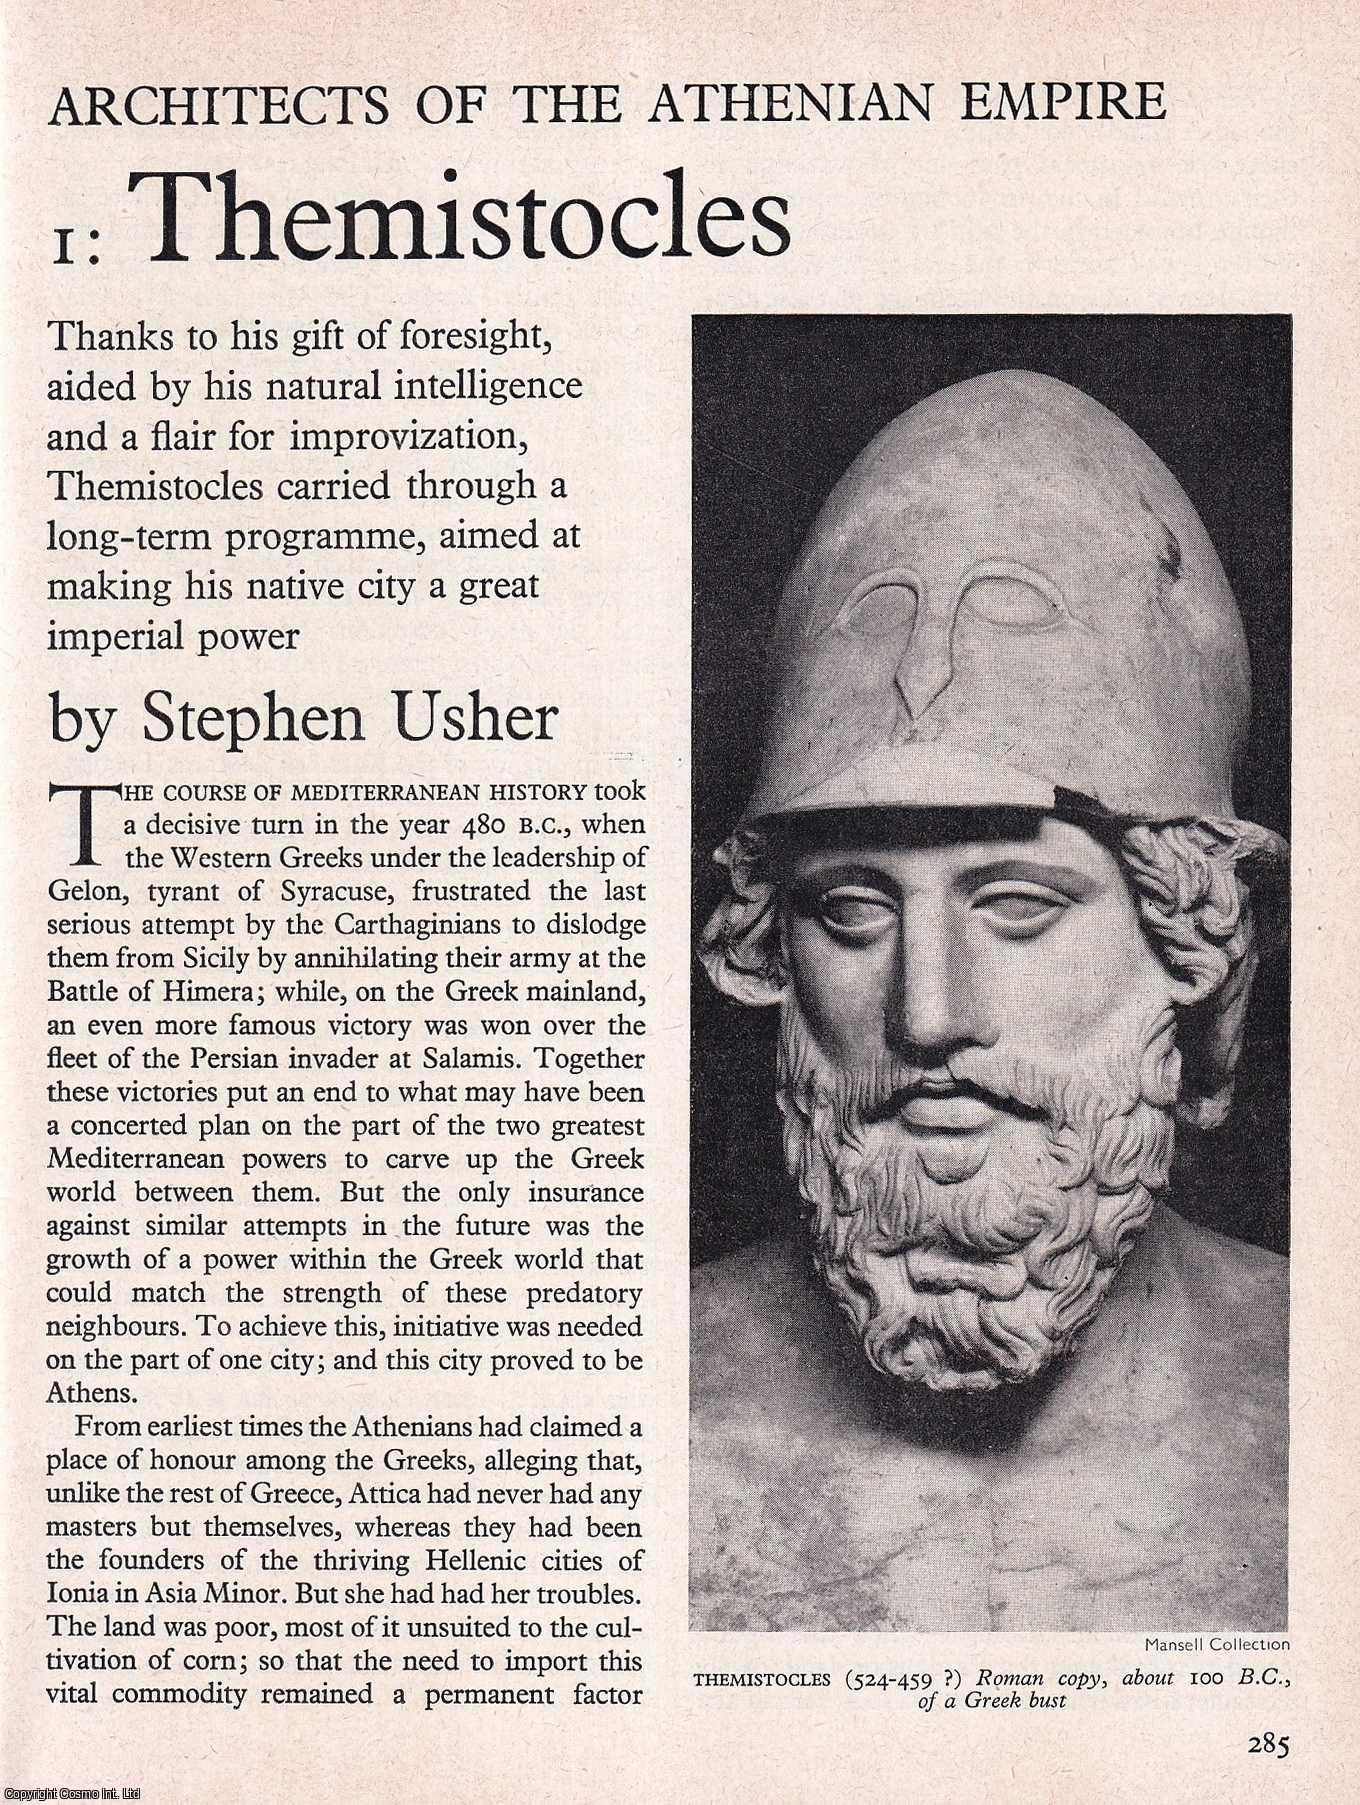 Stephen Usher - Themistocles: Architects of The Athenian Empire. An original article from History Today magazine, 1967.